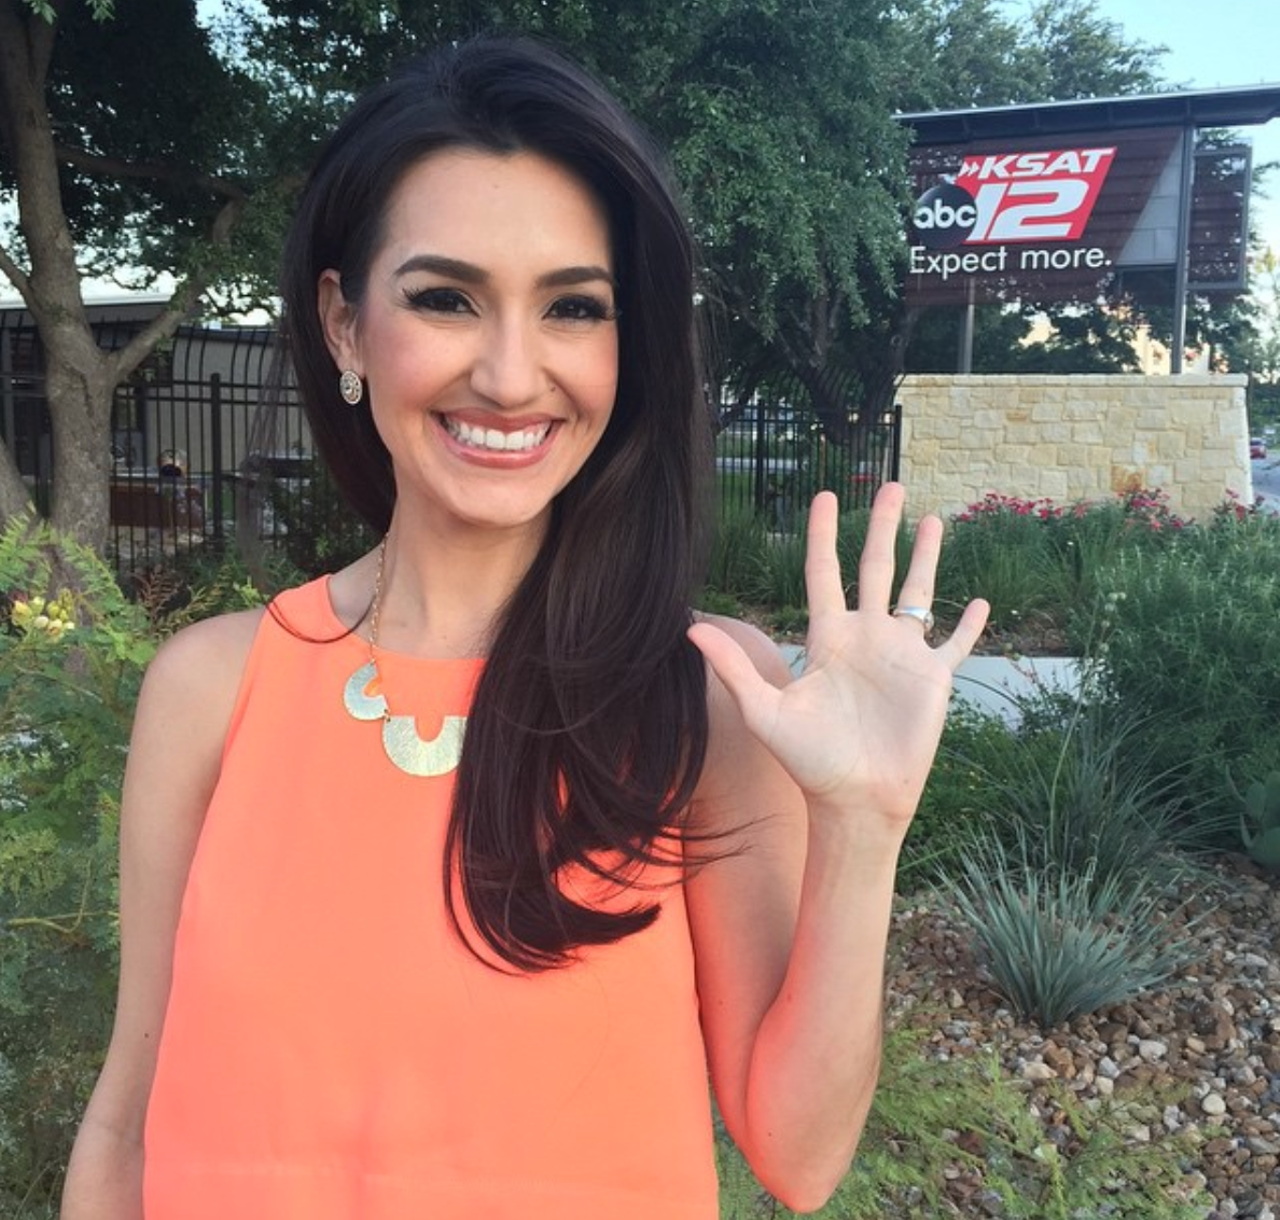 Isis Romero
If you've got amazing hair and a great smile, why not go as fired KSAT news anchor Isis Romero? Augment your camera-ready threads by carrying a pink termination notice in one hand and perhaps even a lawsuit in the other.
Photo via Instagram / romero_isis